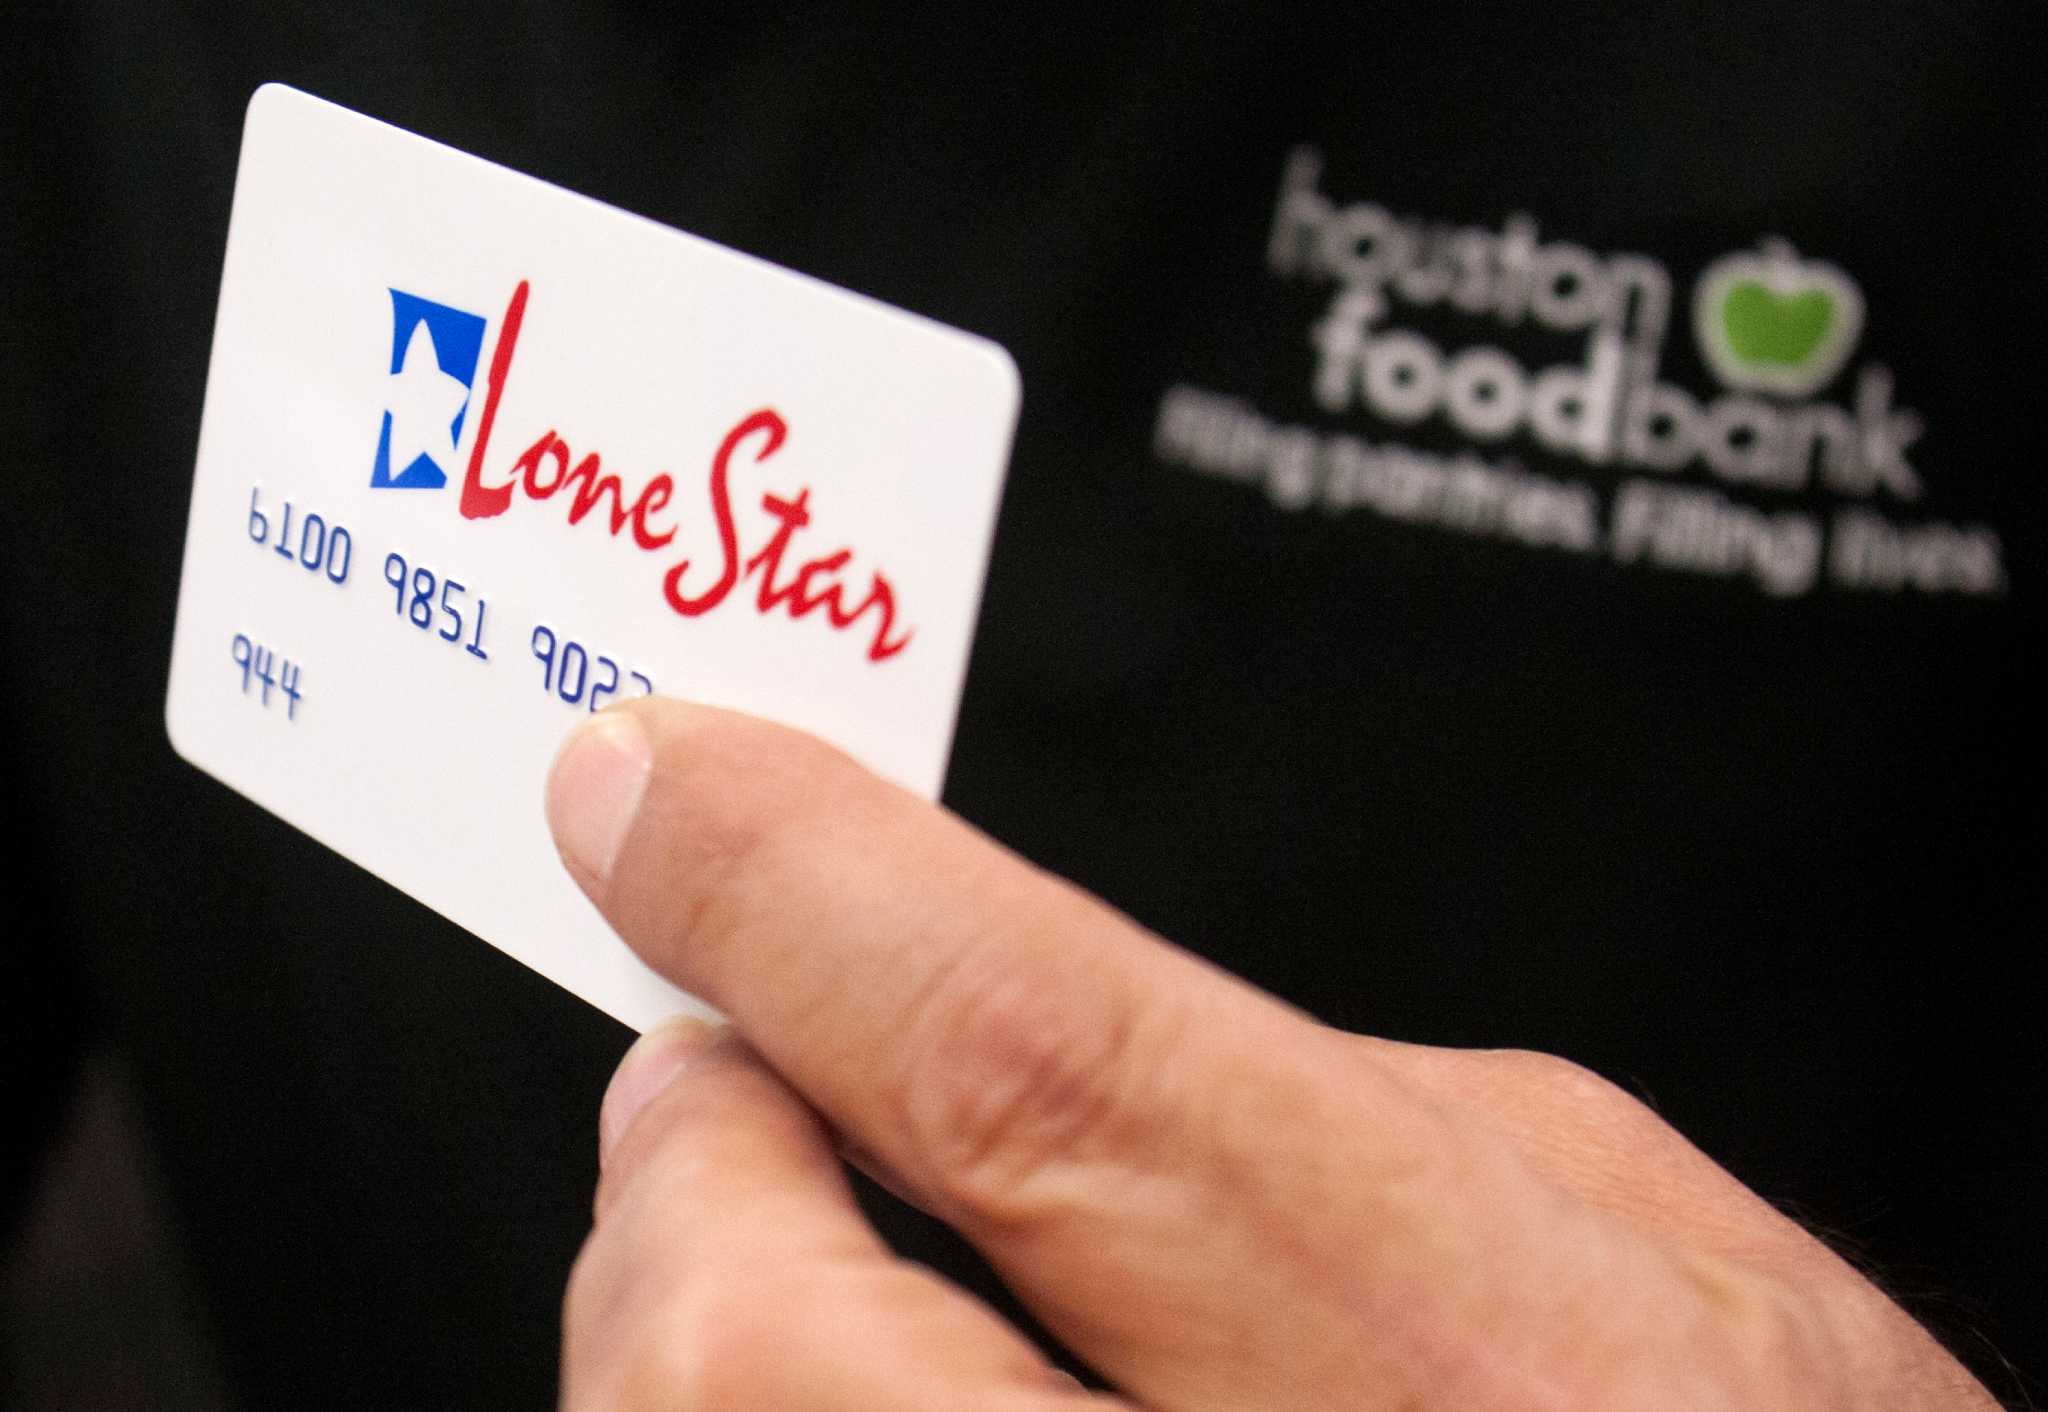 Bills would require photos of food stamp recipients on Texas EBT cards